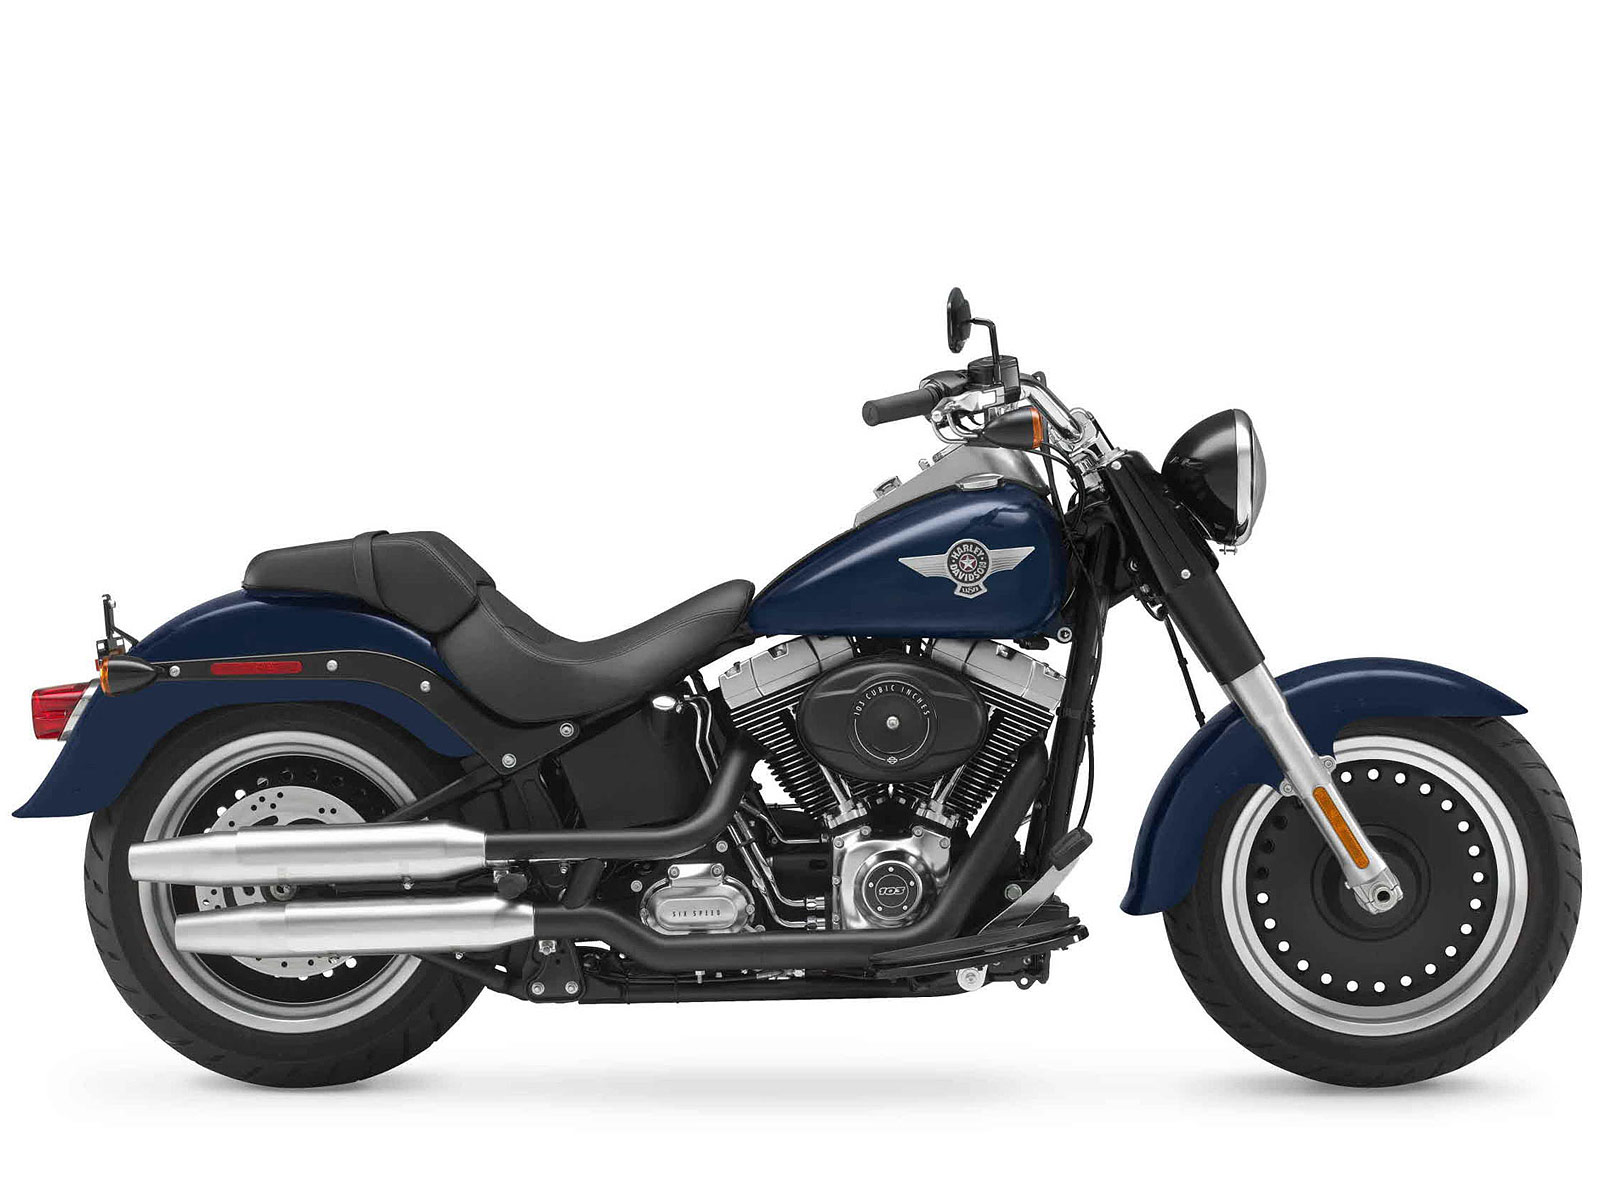 Harley-Davidson pictures. Specs, insurance, accident lawyers